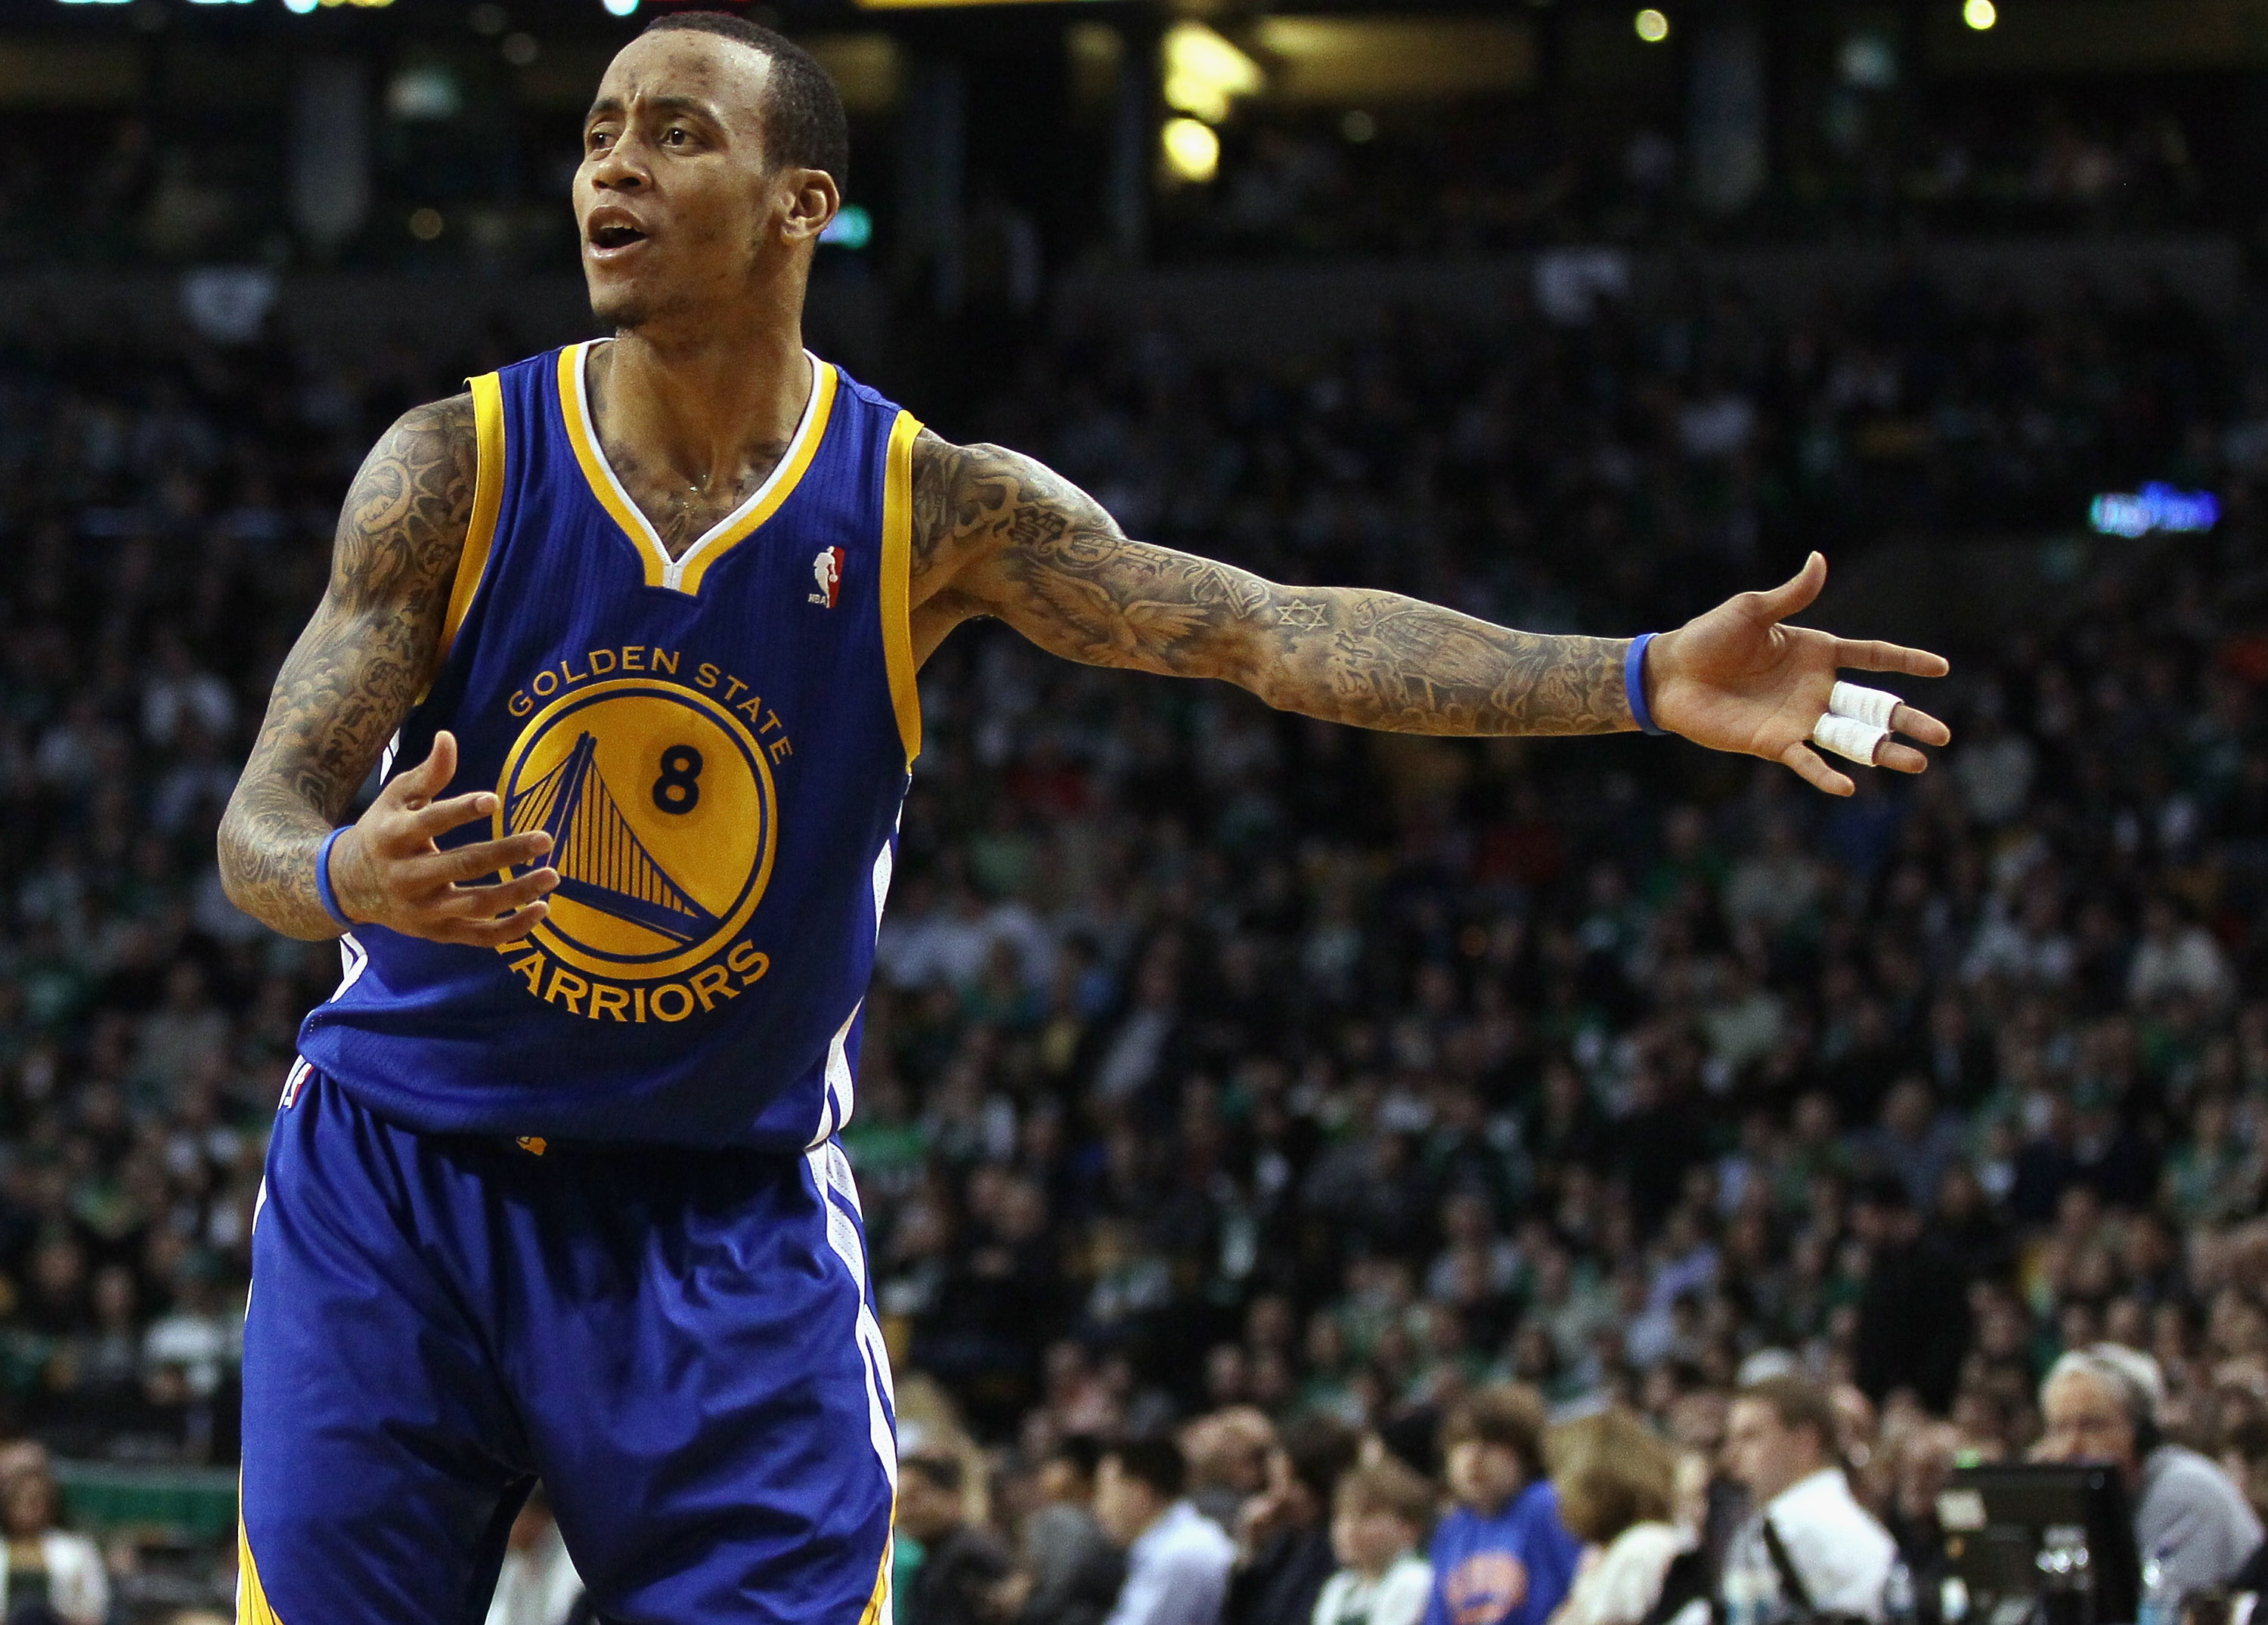 BOSTON, MA - MARCH 04:  Monta Ellis #8 of the Golden State Warriors reacts after the ball is given to the Boston Celtics on March 4, 2011 at the TD Garden in Boston, Massachusetts.  The Celtics defeated the Warriors 107-103. NOTE TO USER: User expressly a